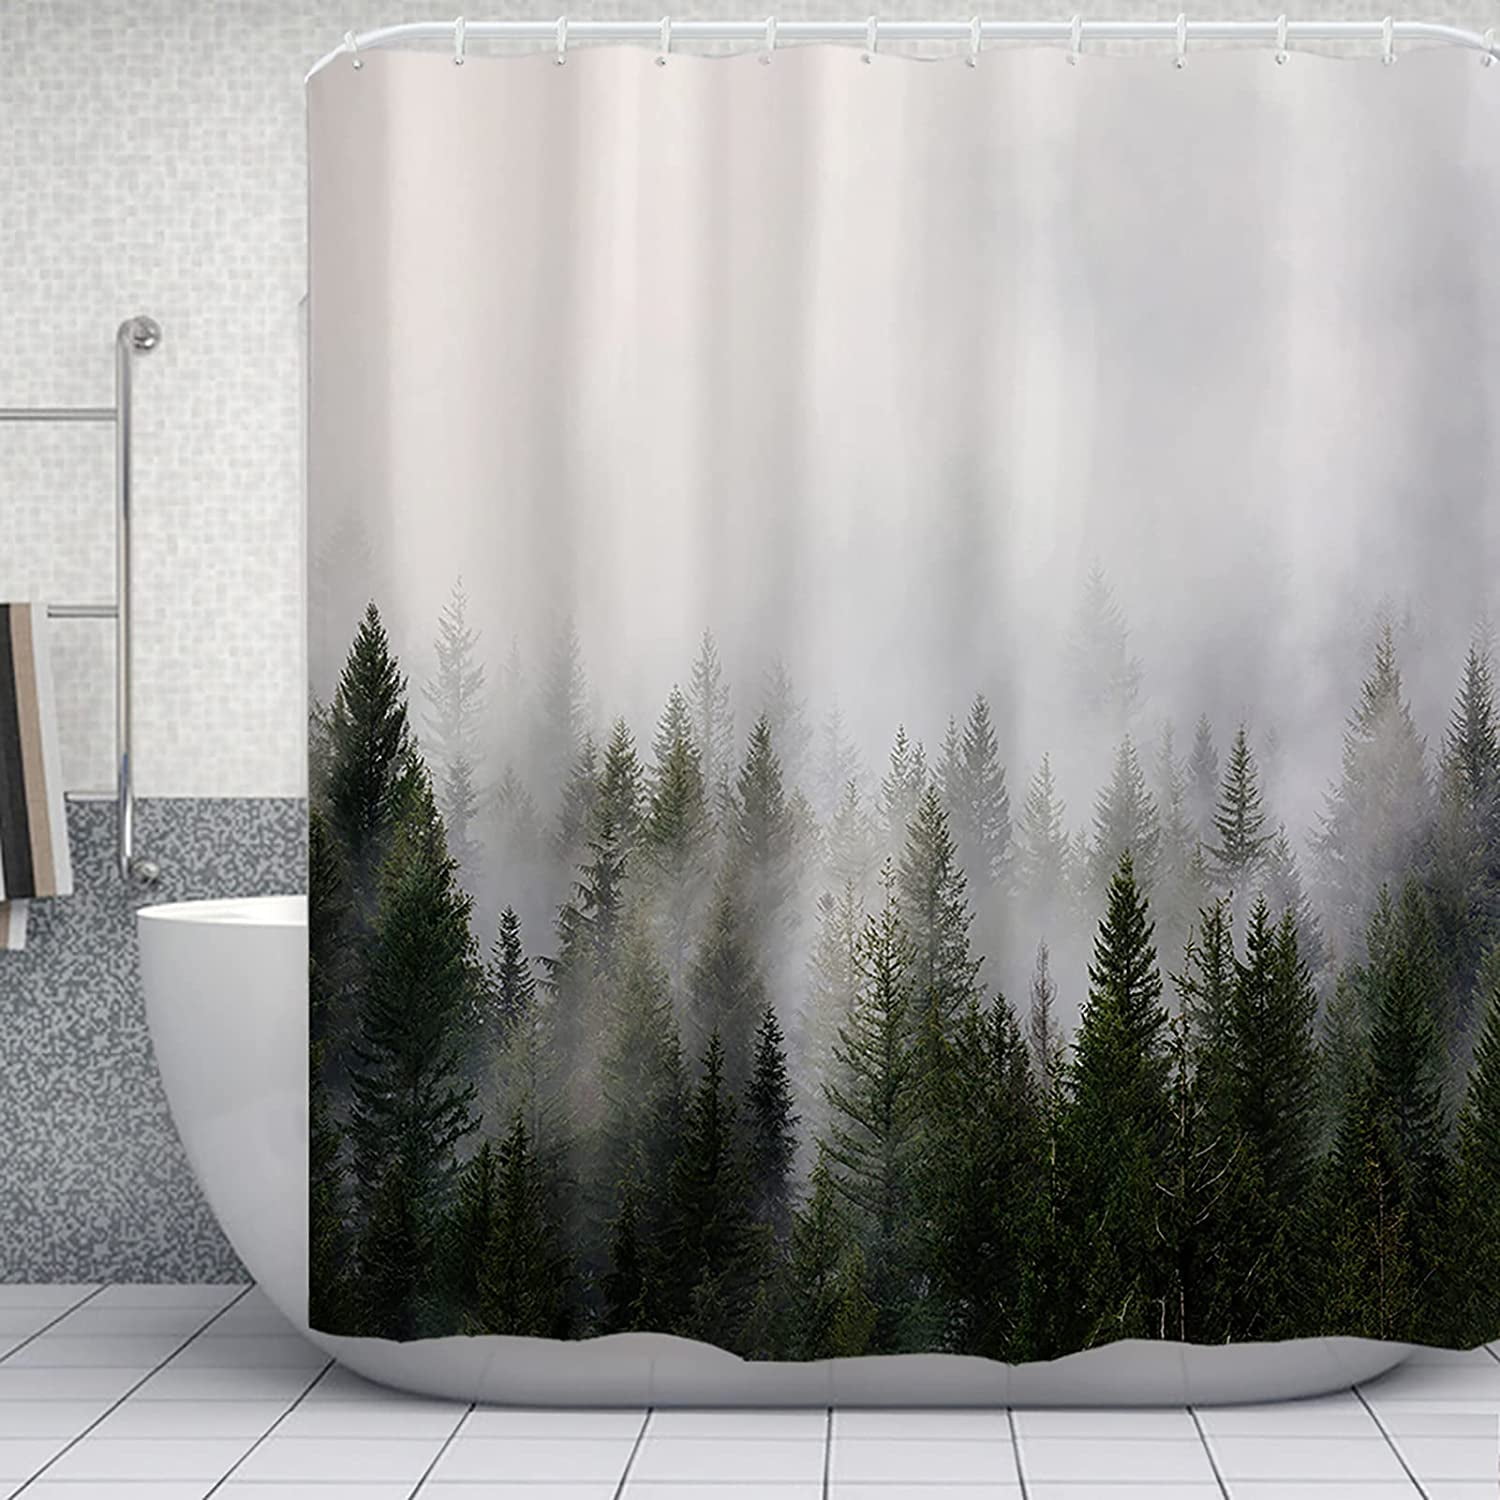 YJ YANJUN White and Silver Tree Shower Curtain Embossed Branches Design Luxury Waterproof Shower Curtain 72x72 Inch 1 Panel